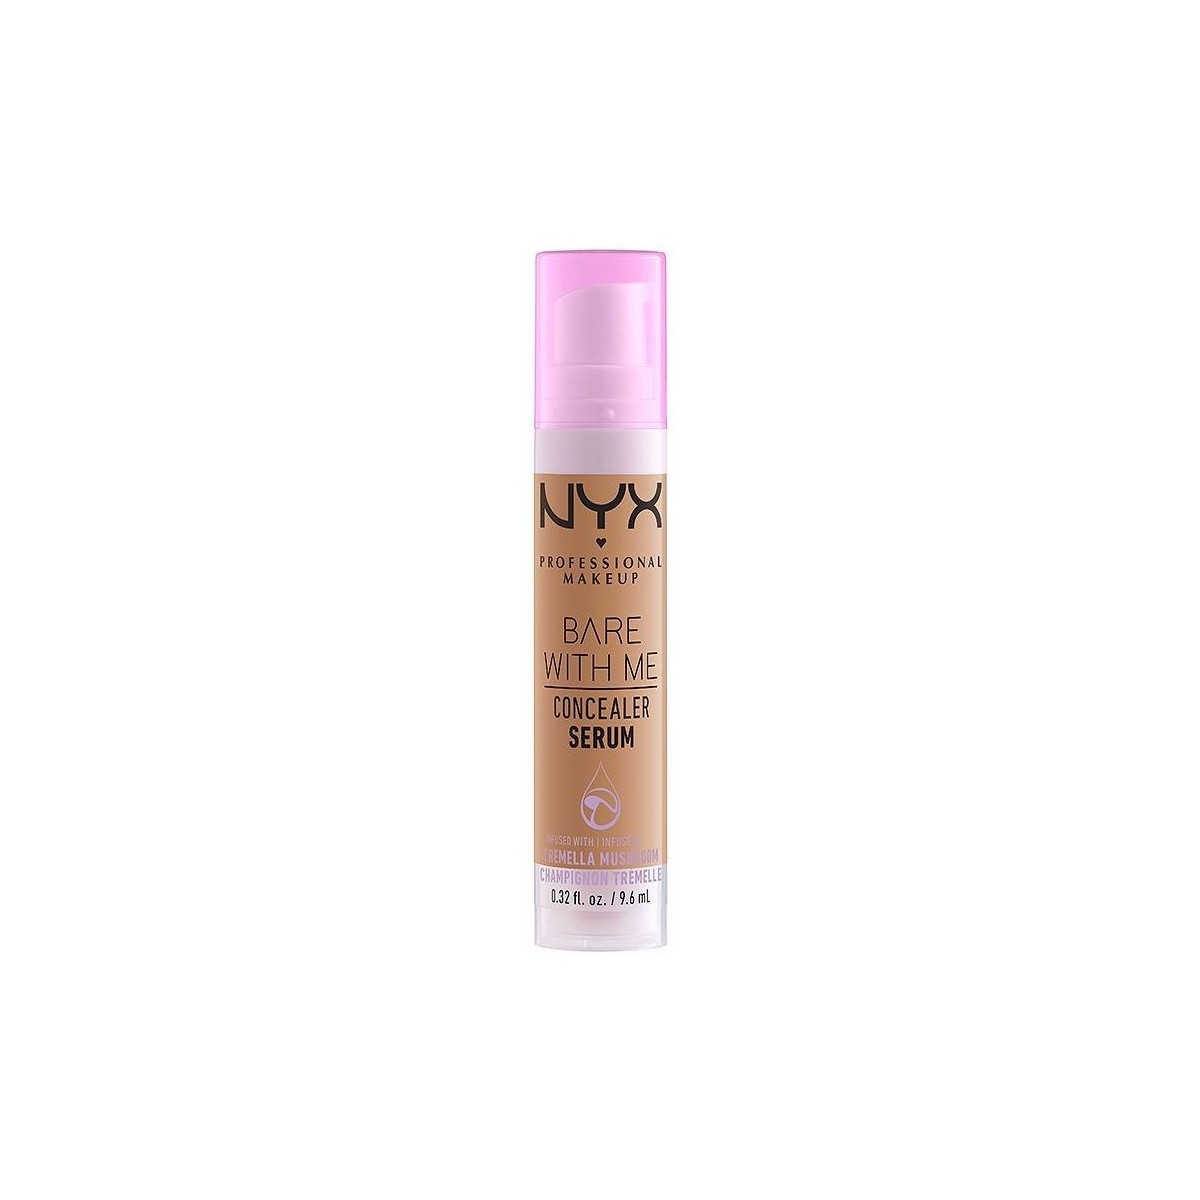 Beauty Make-up & Foundation  Nyx Professional Make Up Bare With Me Concealer Serum 08-sand 